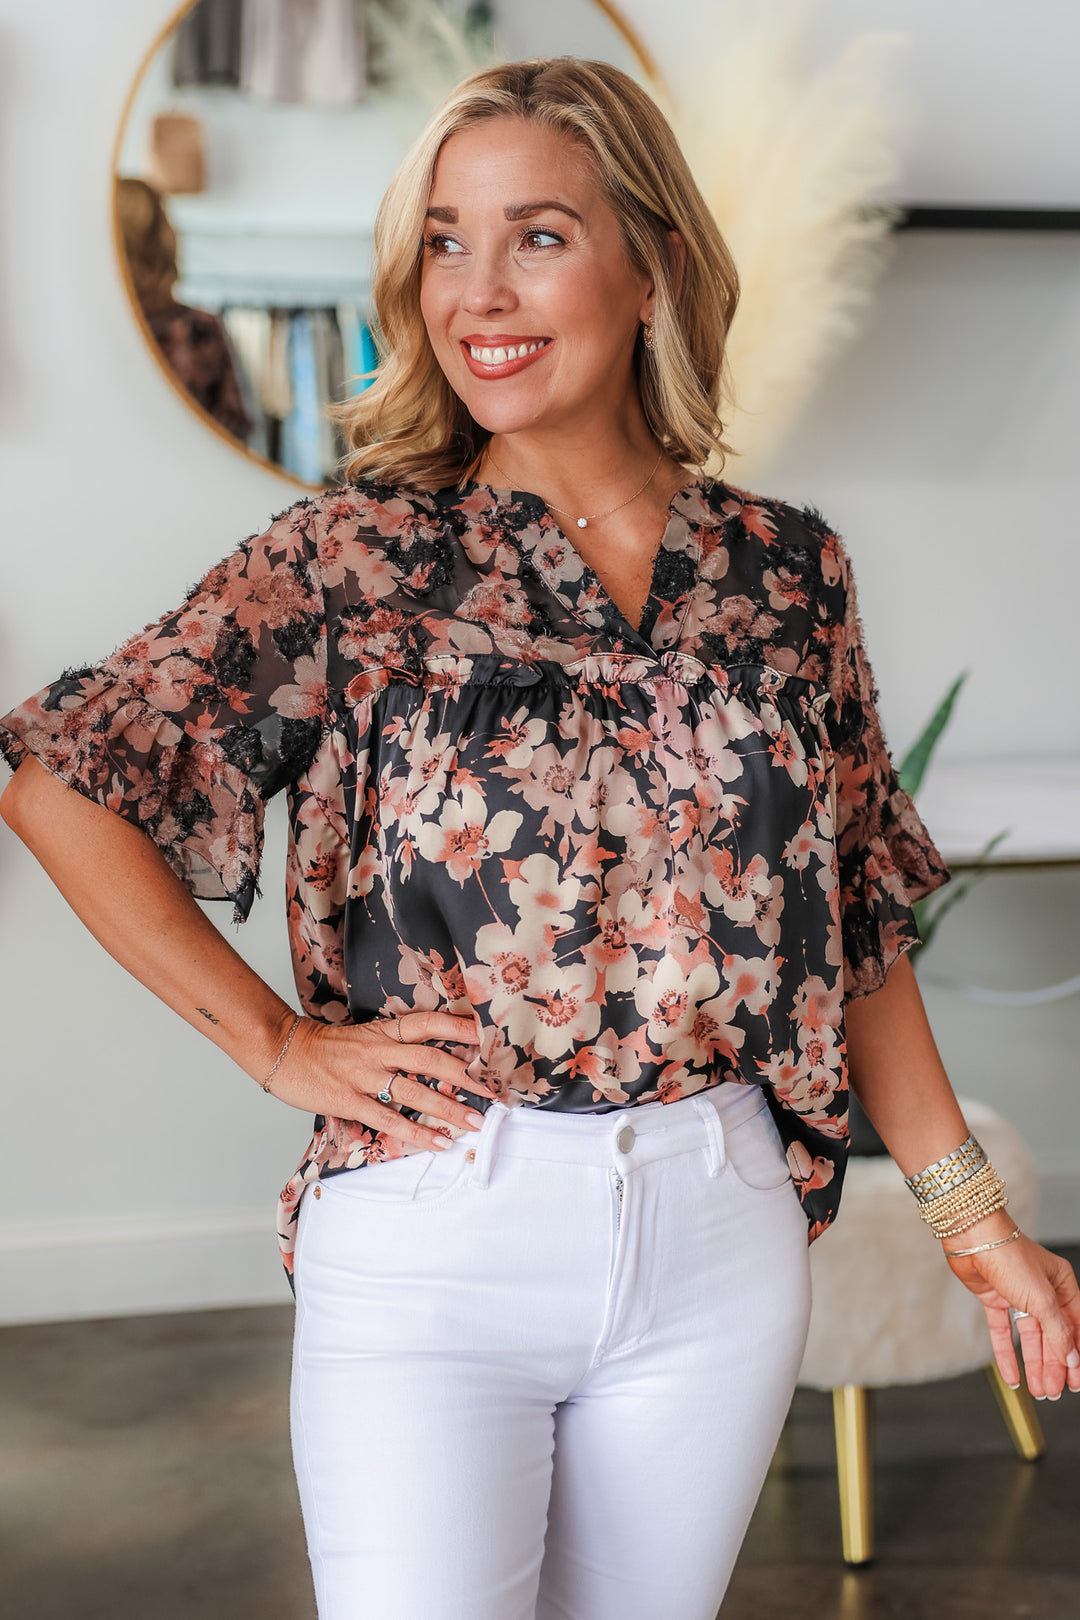 A blonde woman standing in a shop wearing a black and mauve floral print top with ruffle sleeves and a v neck with white jeans.